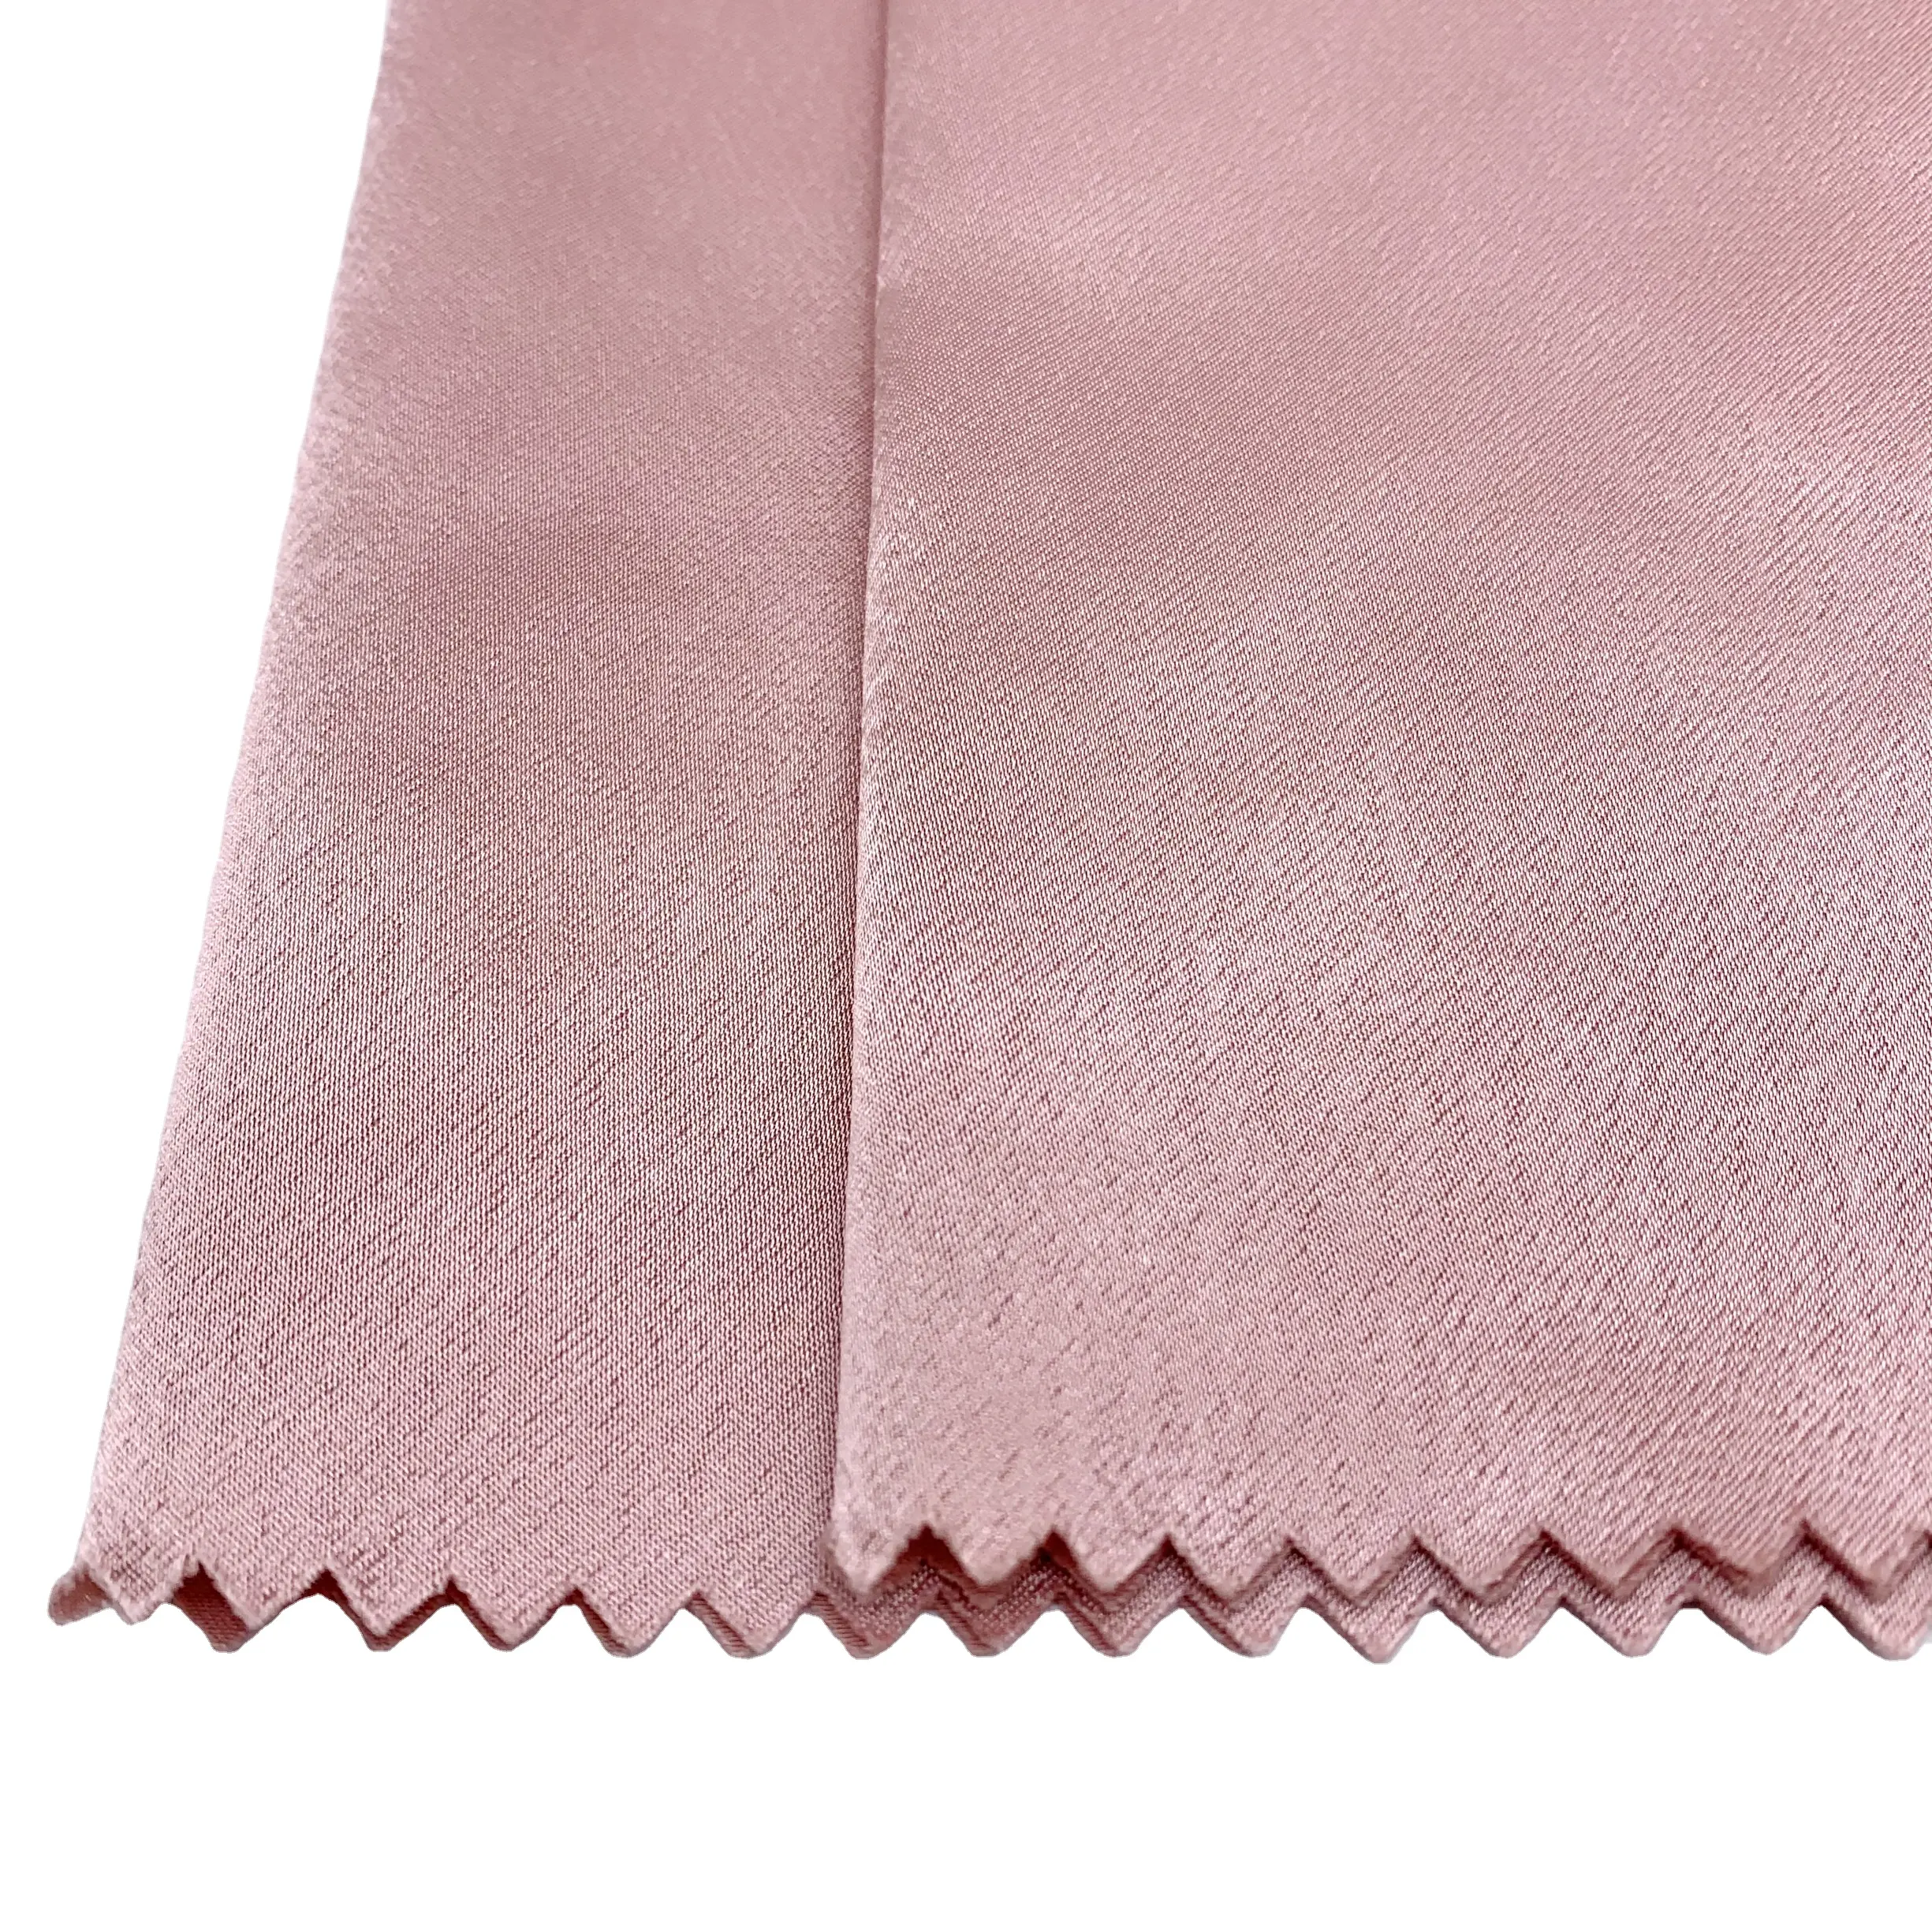 Latest Design Womens Fabric 100% Polyester High Twist Imitated Acetate Satin Fabric For Dress